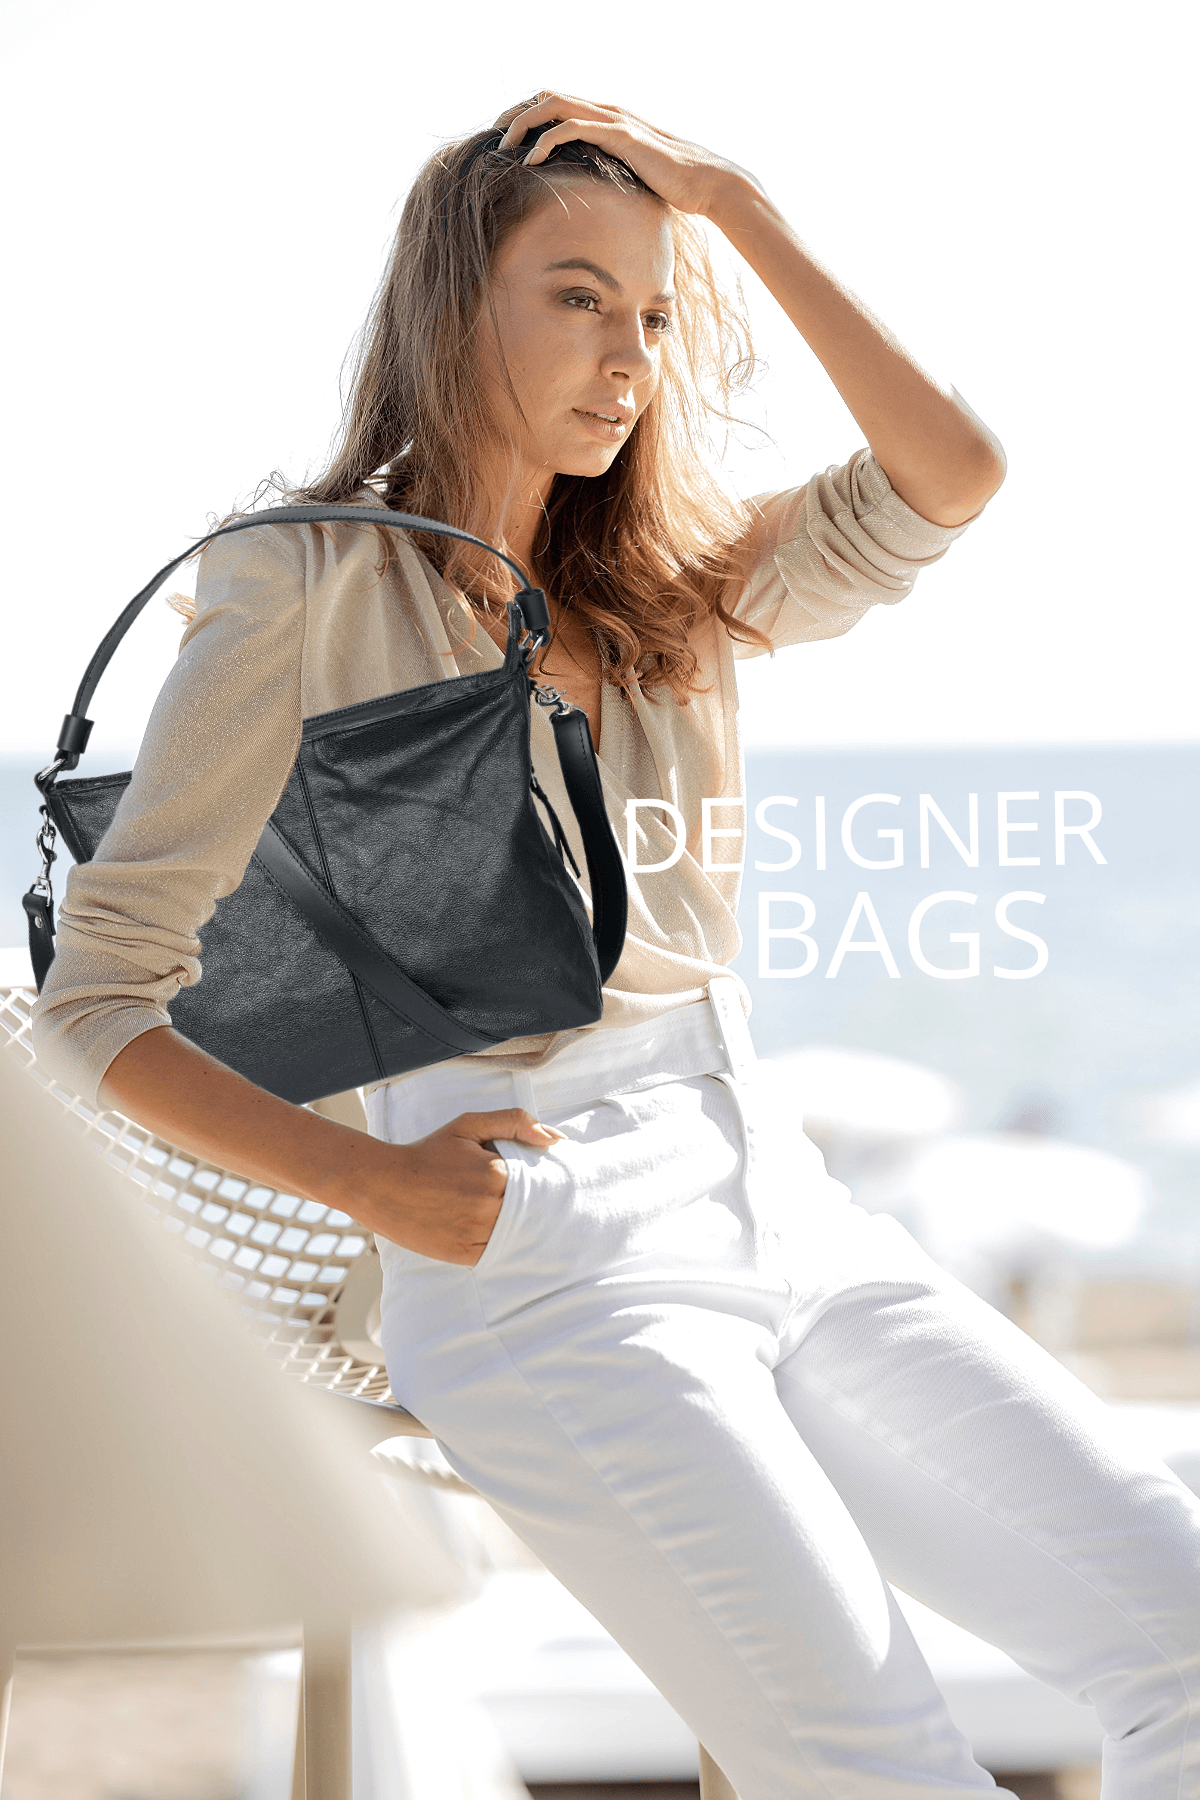 Celtic The Hobo Bag in Leather, Soft & Slouchy Silhouette, Timeless & Elevated Design. - CELTICINDIA